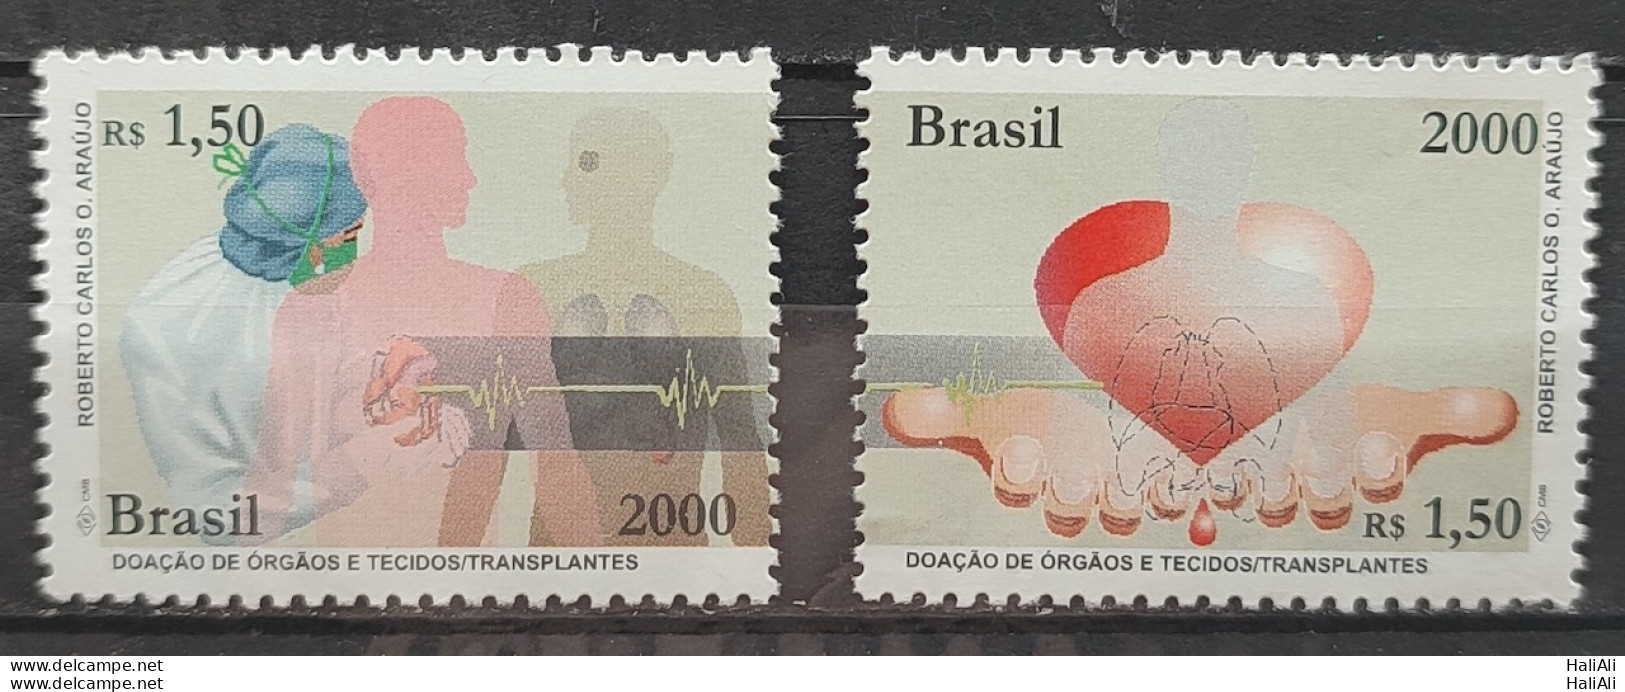 C 2341 Brazil Stamp Donation Of Organ And Tissues Science Health 2000 Complete Series Separate - Nuovi